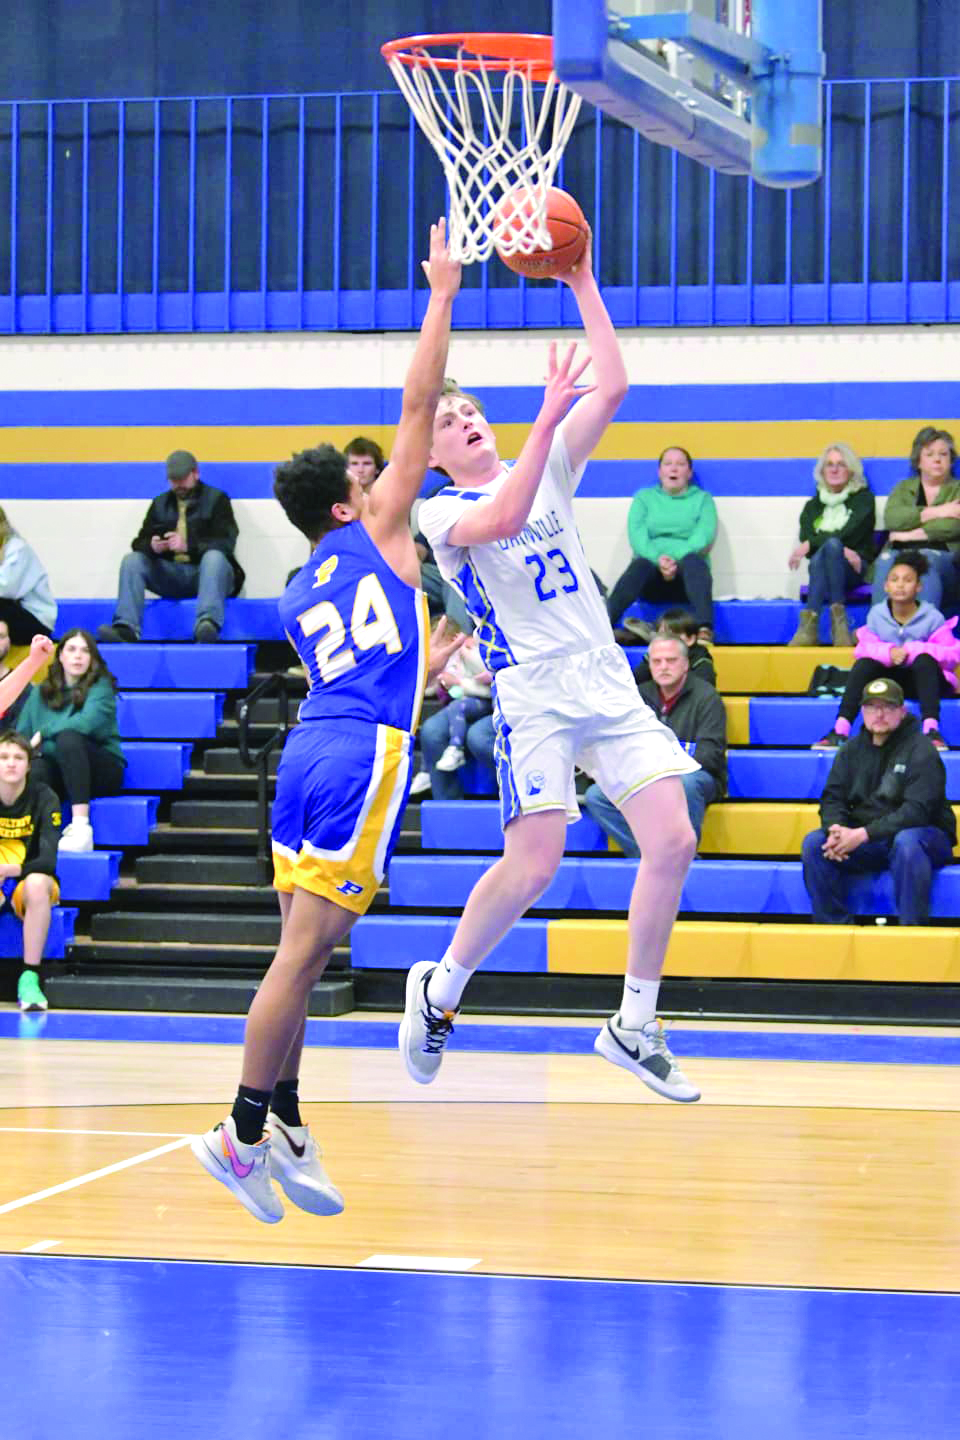 Read more about the article Granville boys’ basketball dominates Poultney